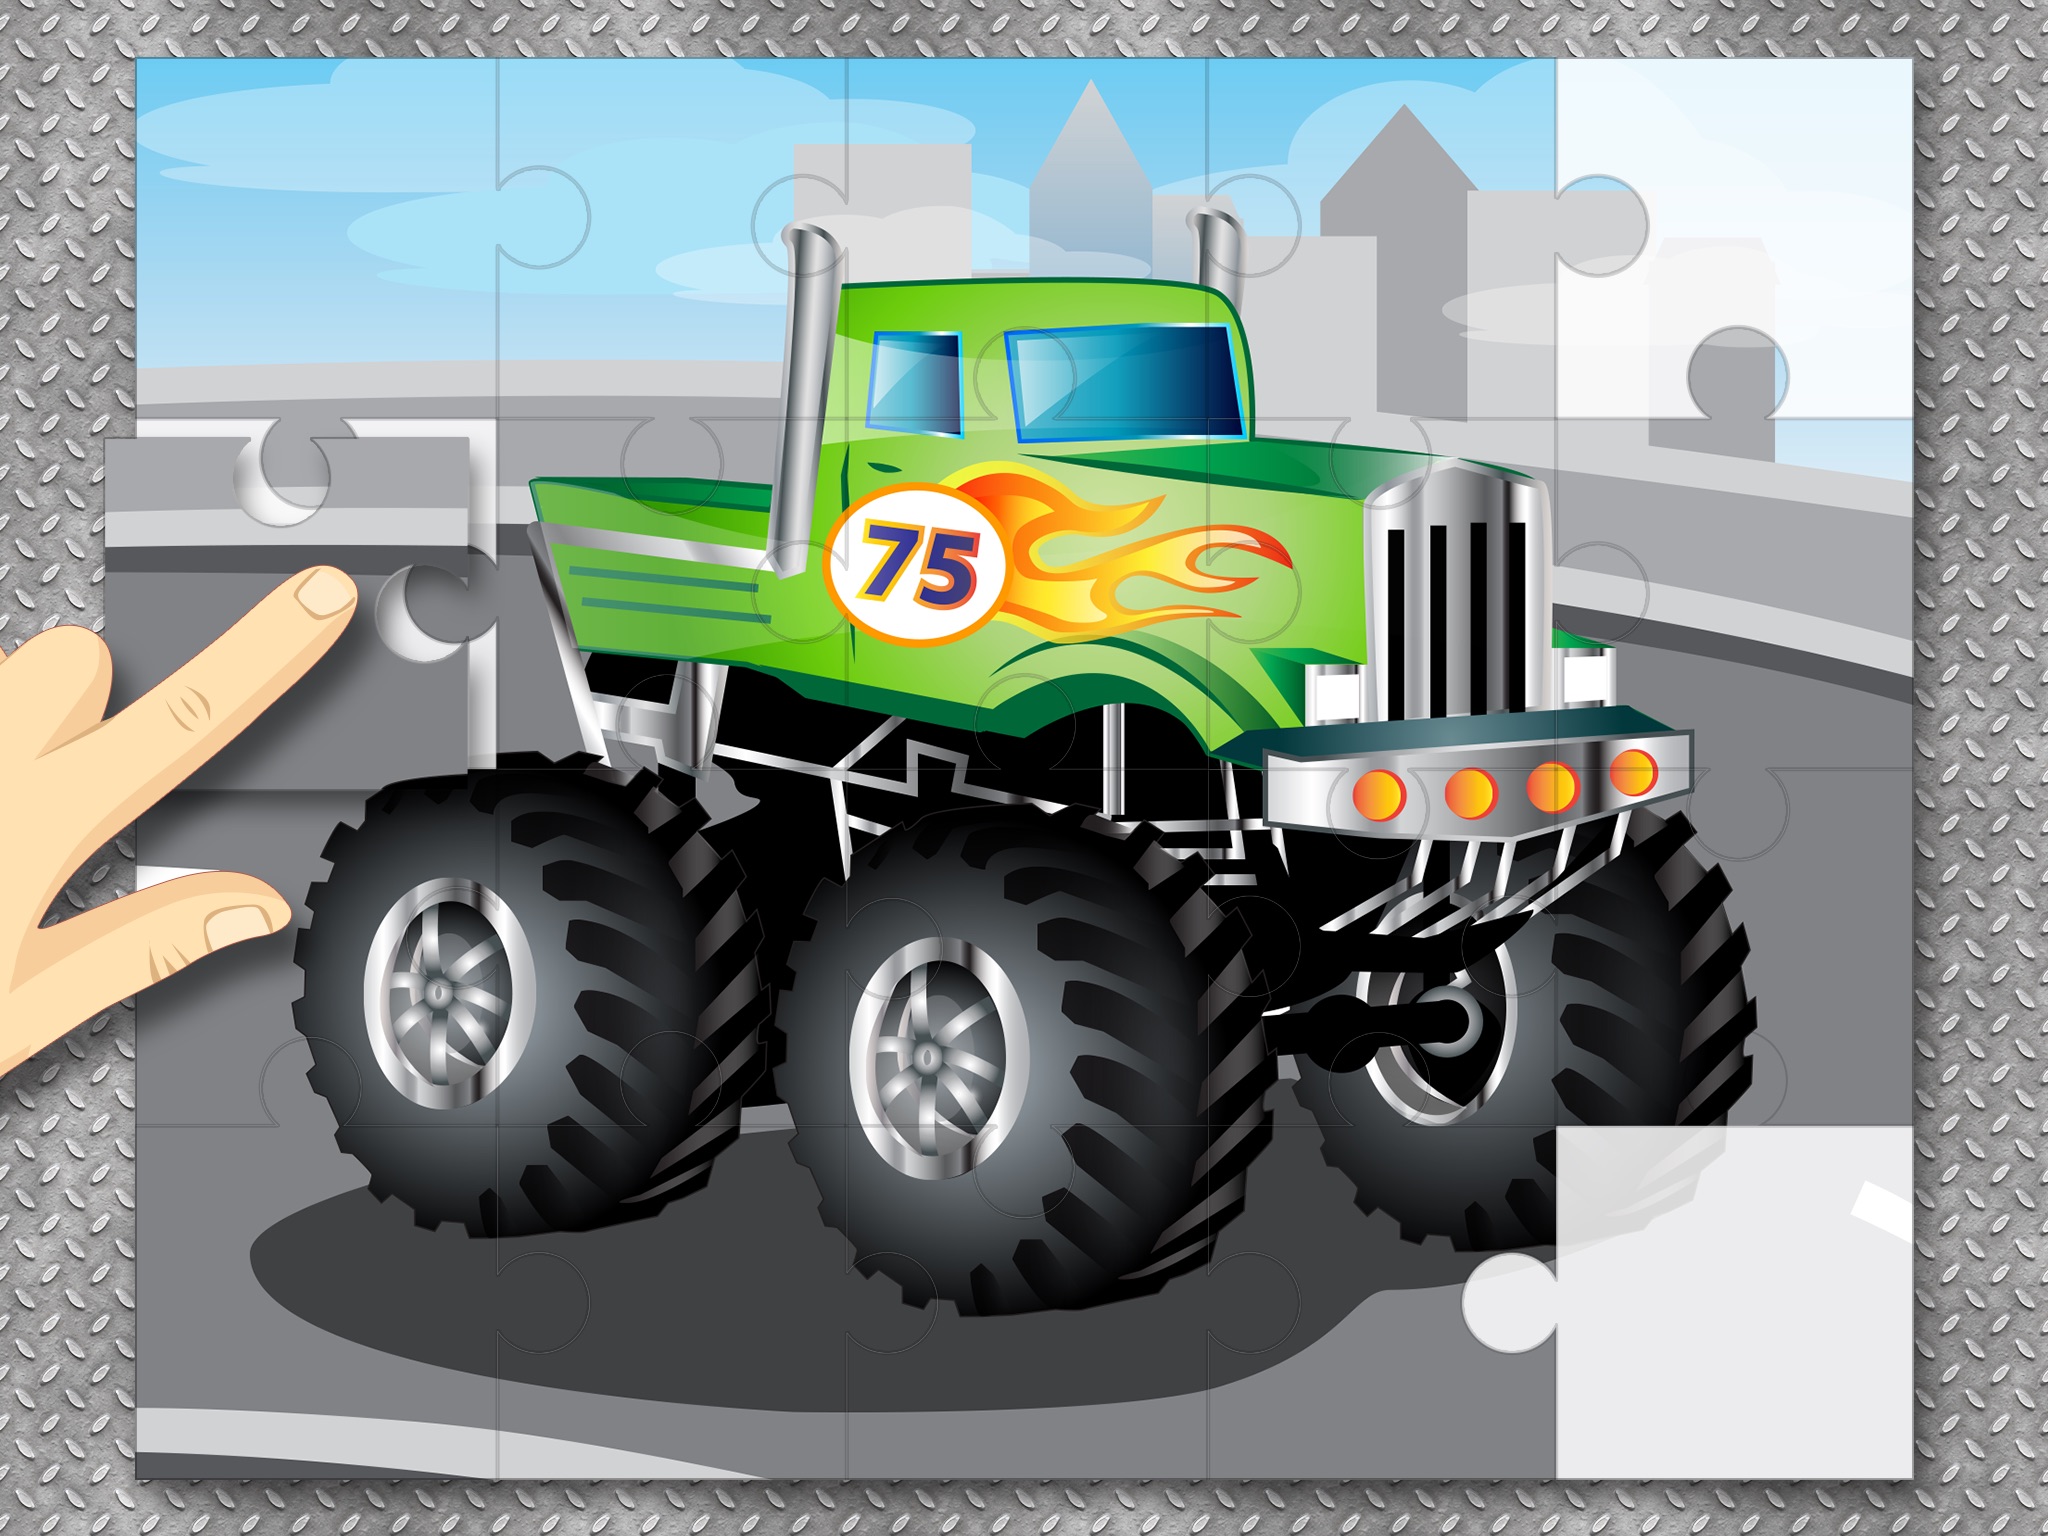 Sports Cars & Monster Trucks Jigsaw Puzzles : free logic game for toddlers, preschool kids and little boys screenshot 2